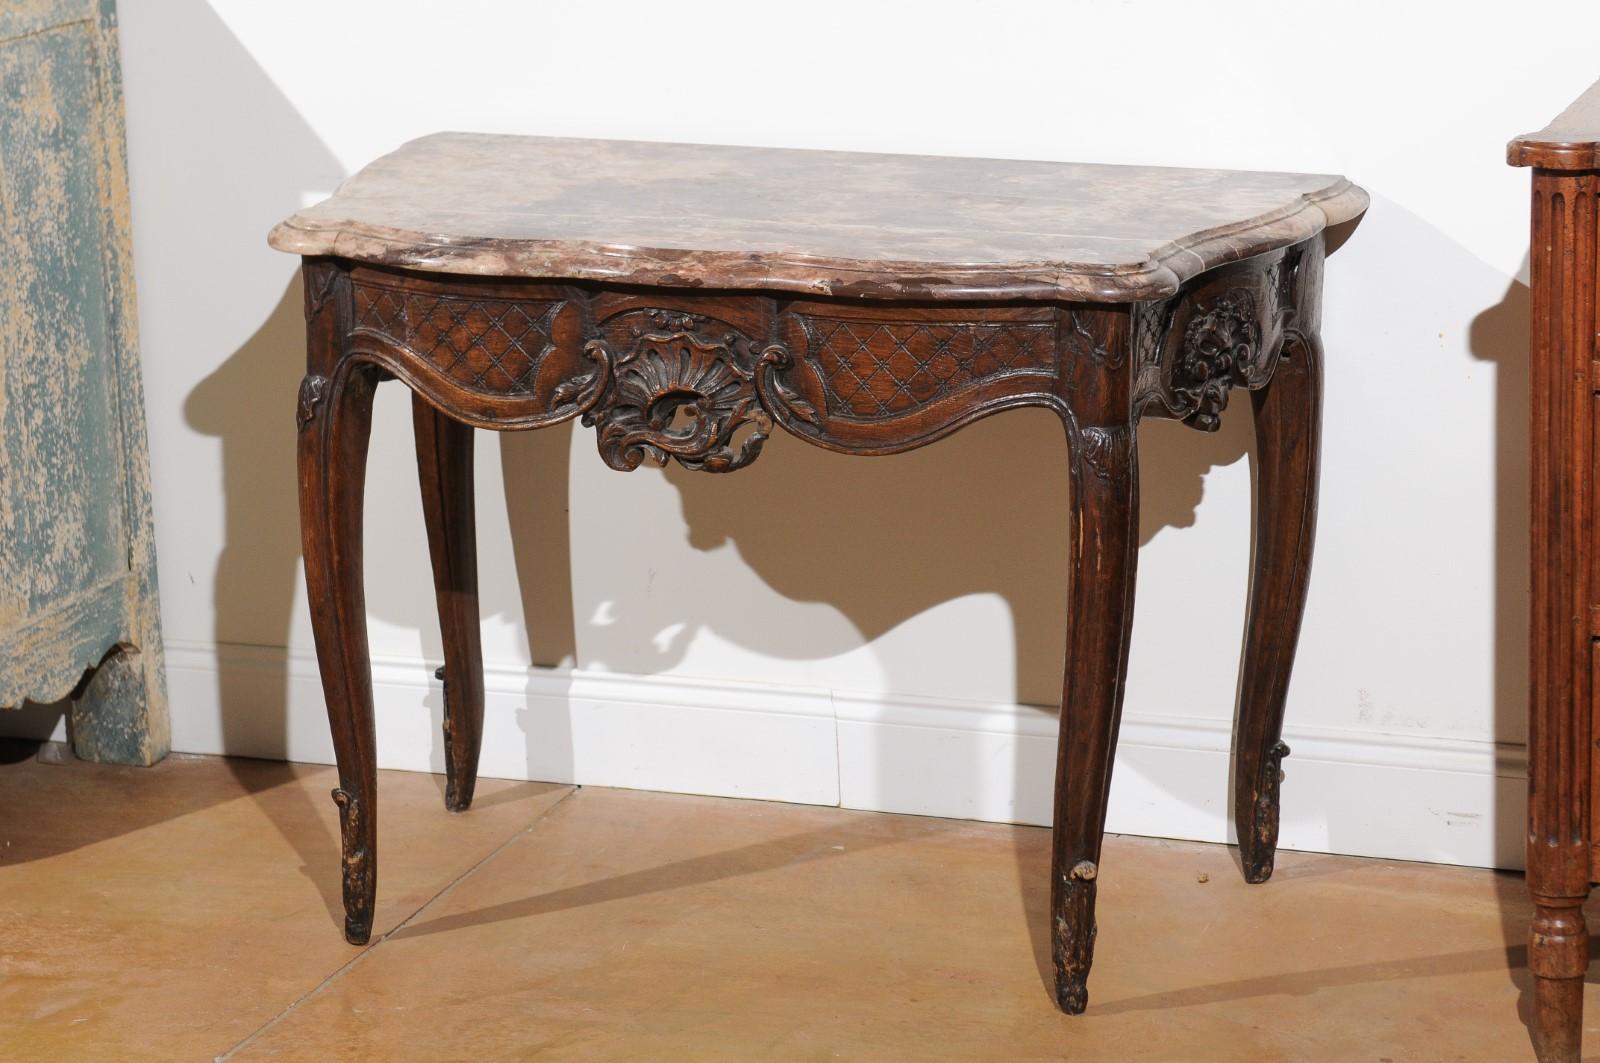 Carved French 1720s Régence Period Walnut Console Table with Original Marble Top For Sale